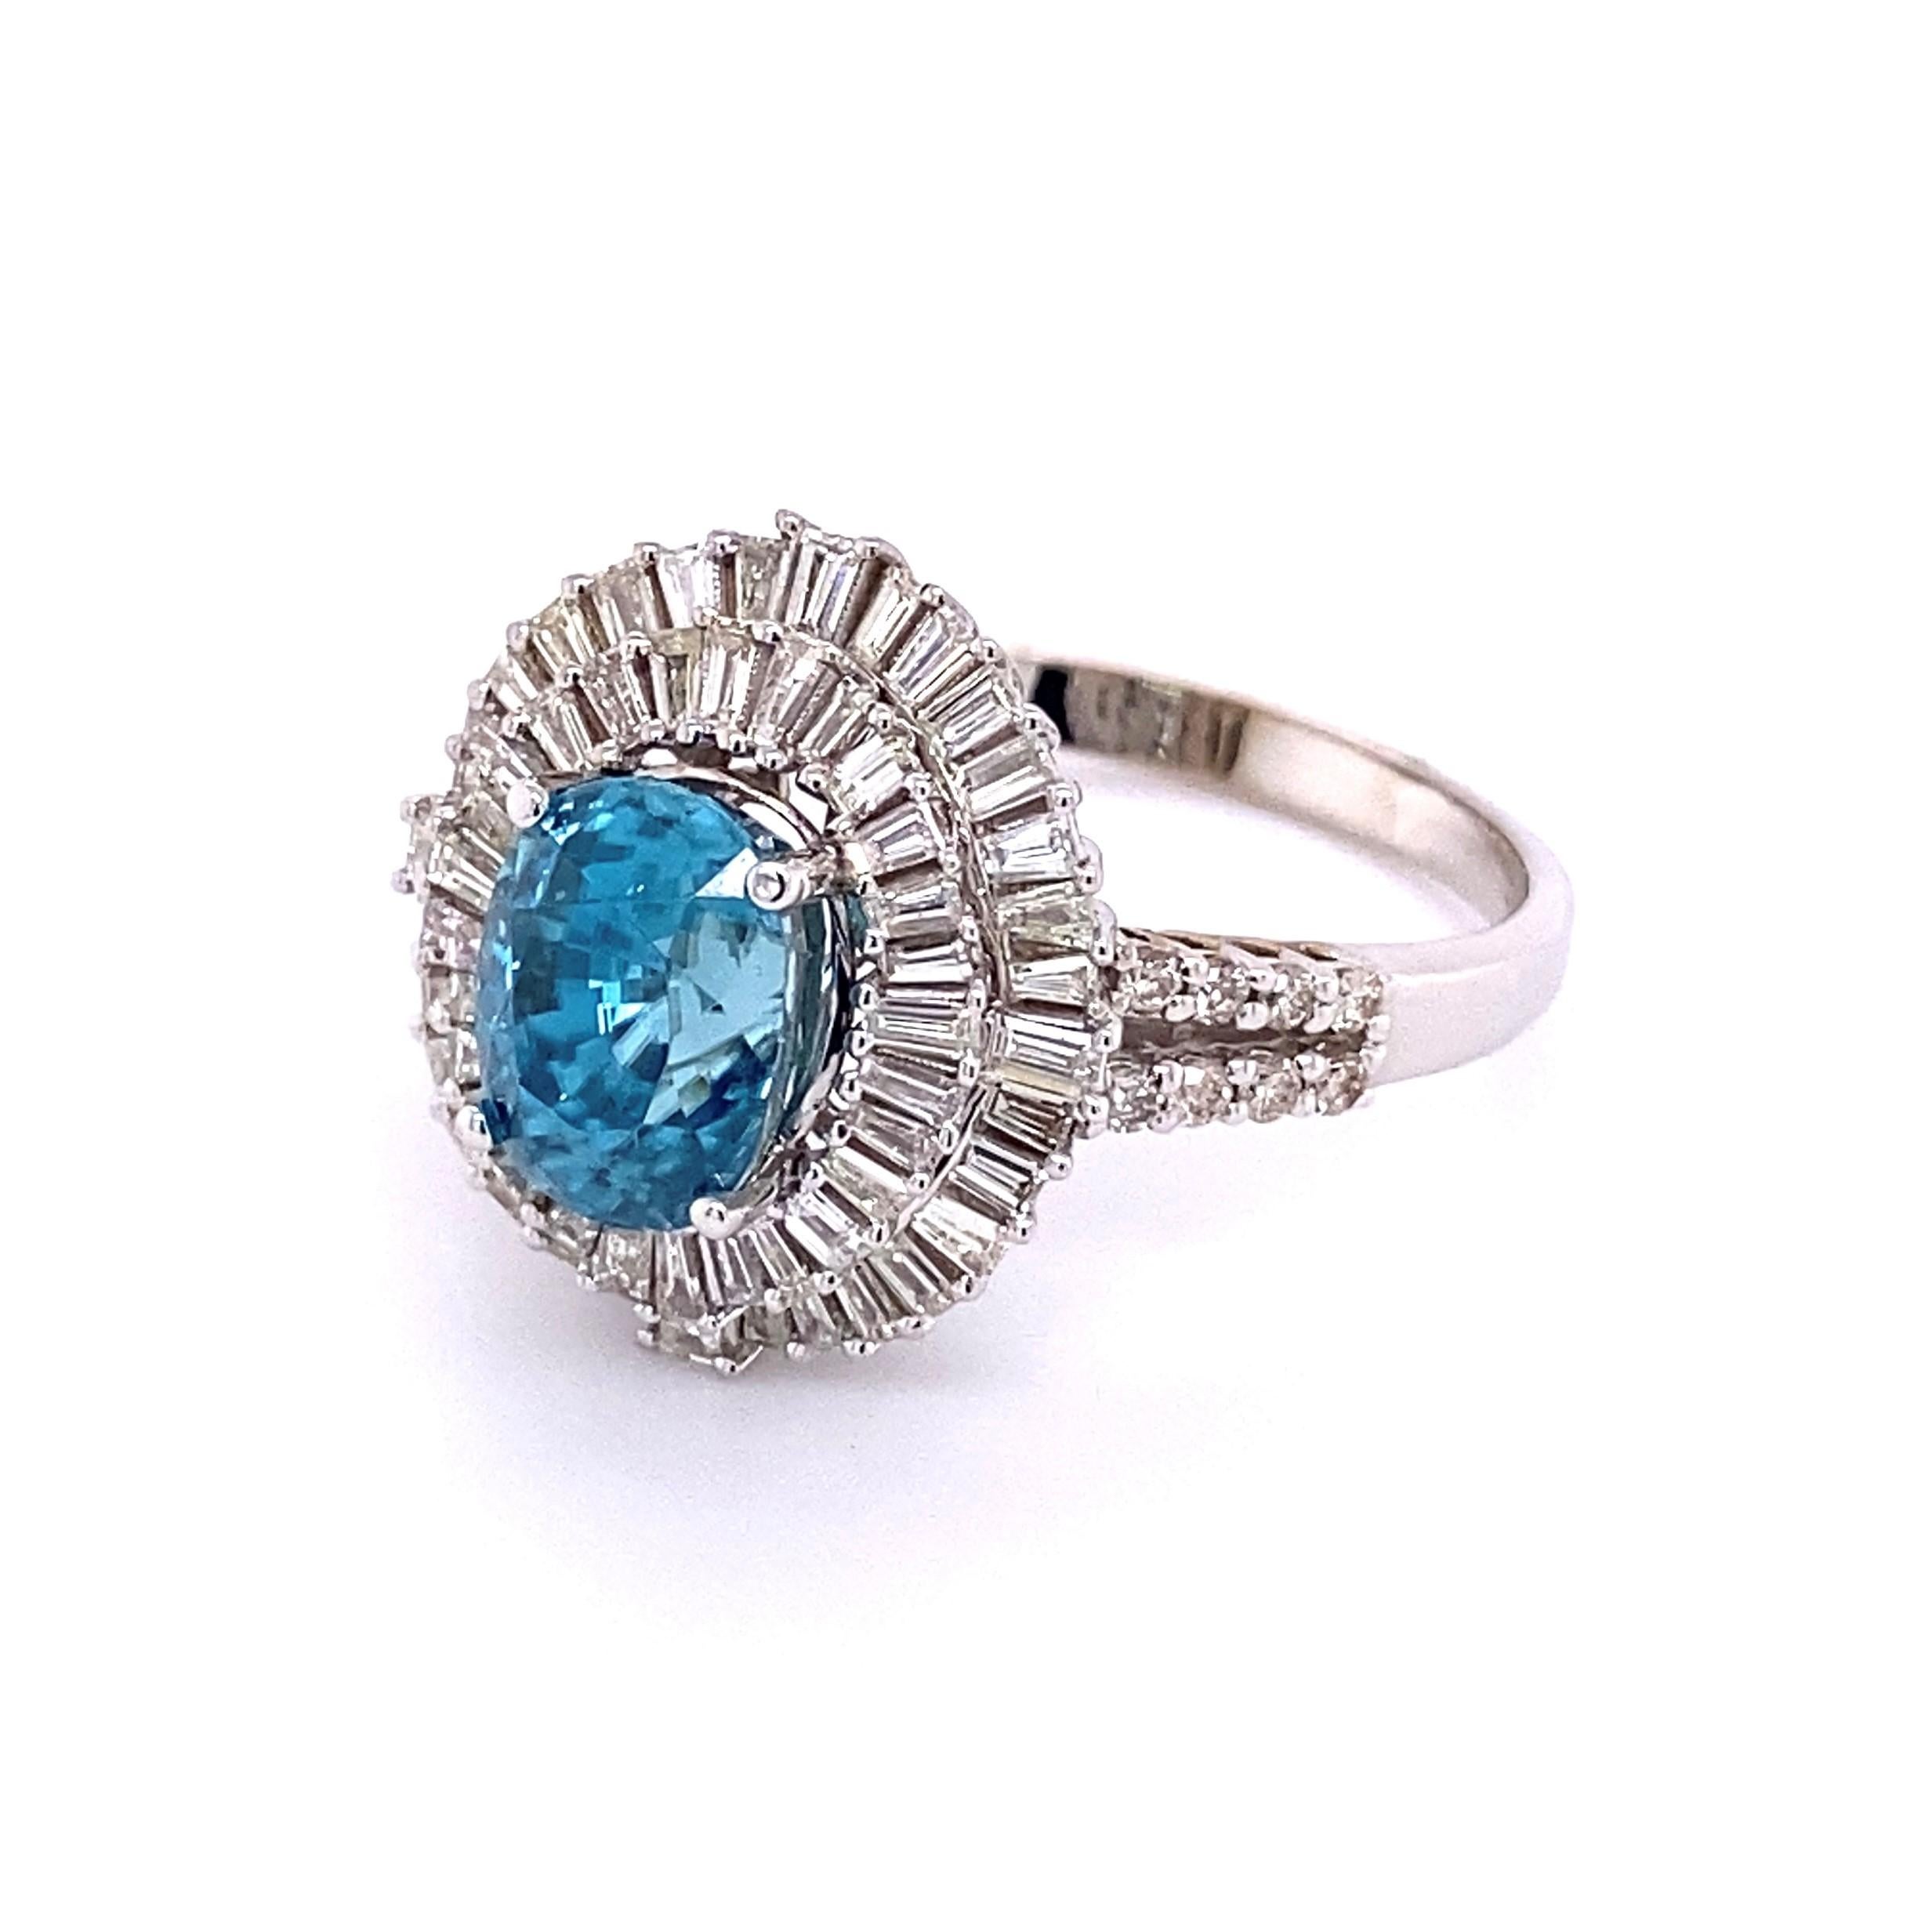 Mixed Cut 5.24 Carat Blue Zircon and Diamond Gold Cocktail Ring Estate Fine Jewelry For Sale